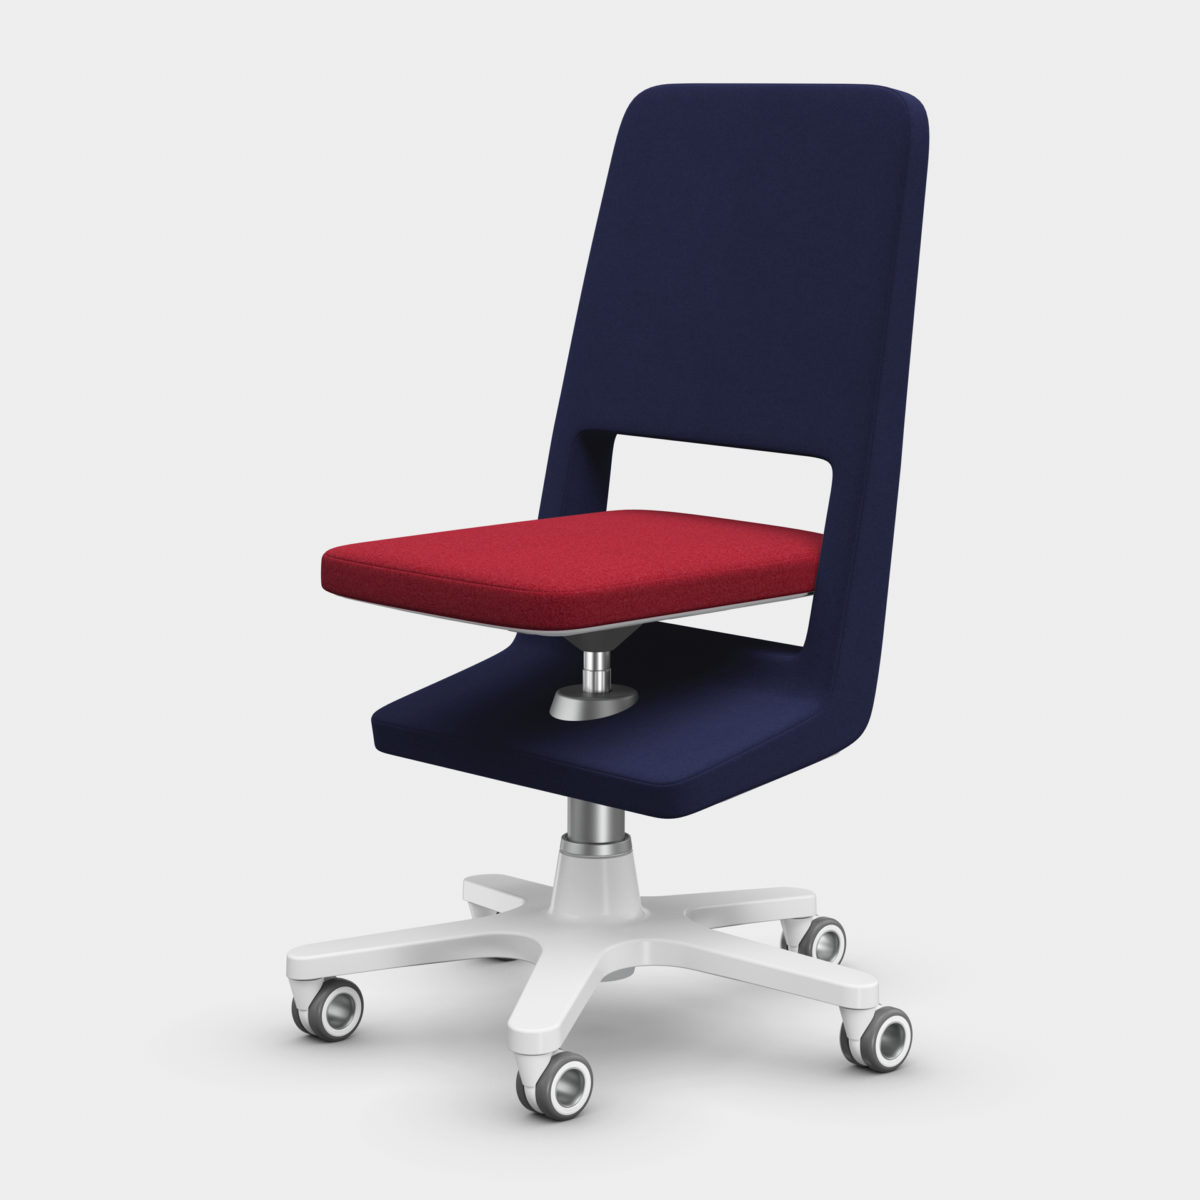 moll's S9 desk chair is the ultimate ergonomic desk chair, whether you have lower back pain or not.